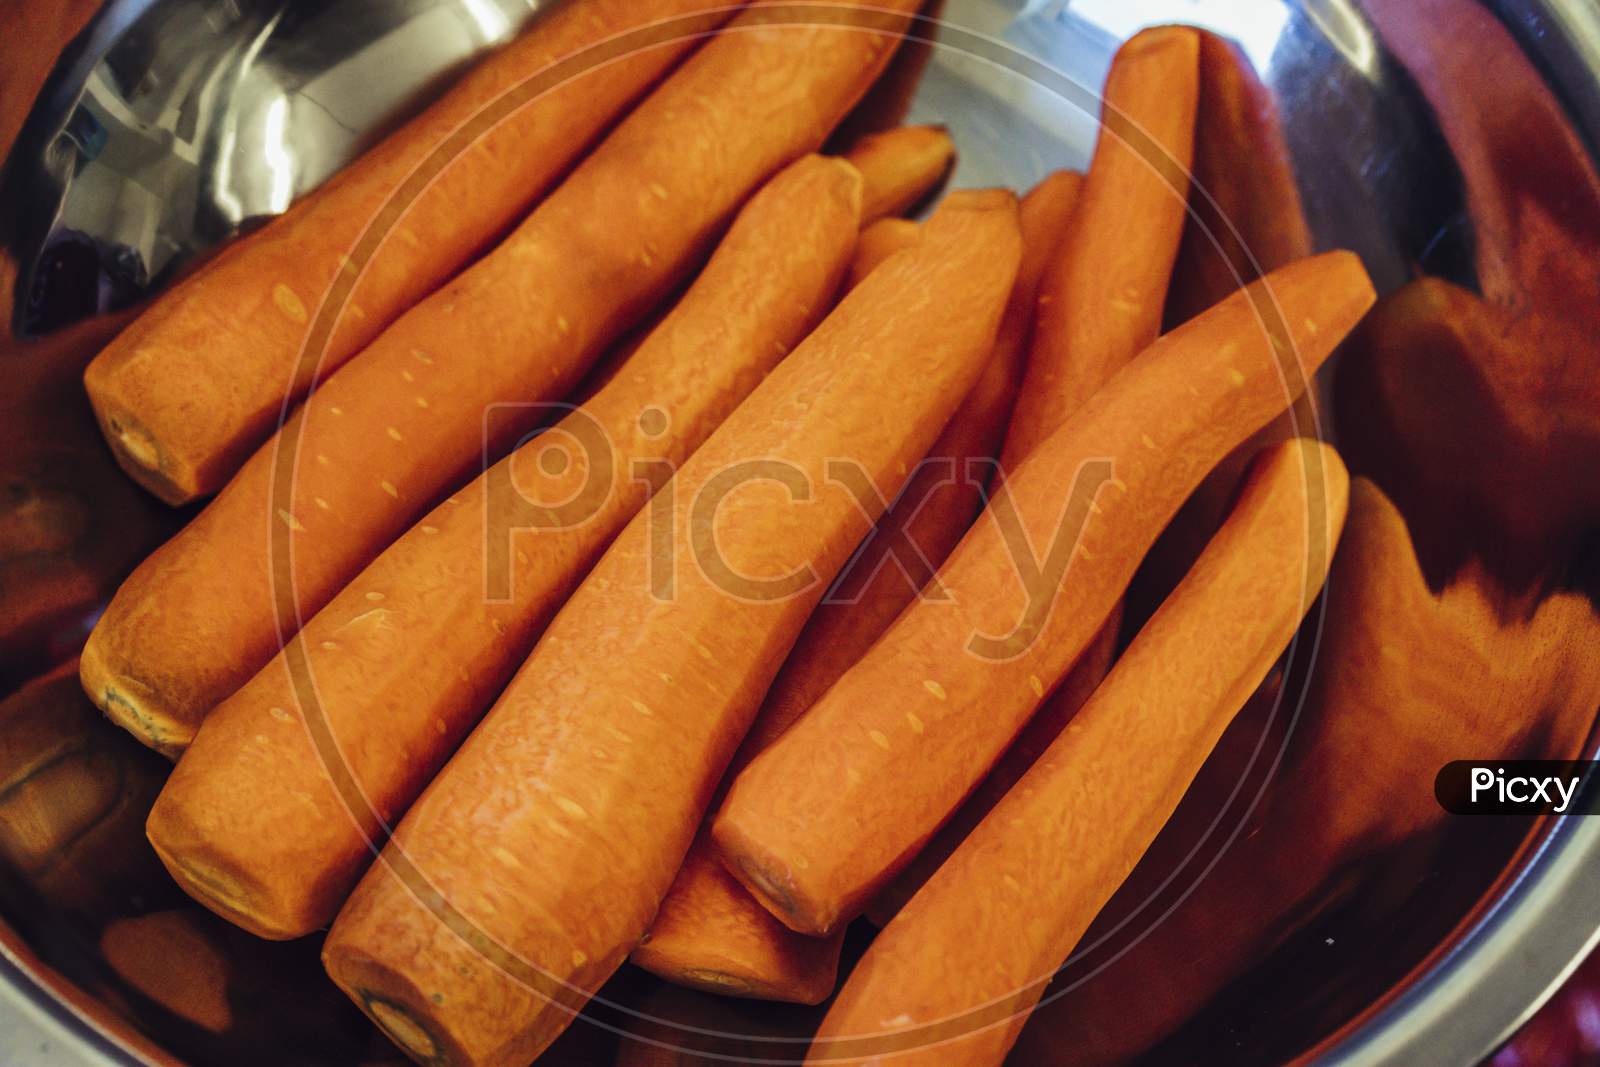 Fresh Peeled Carrots In Stainless Steel Bowl, Isolated Close Up View